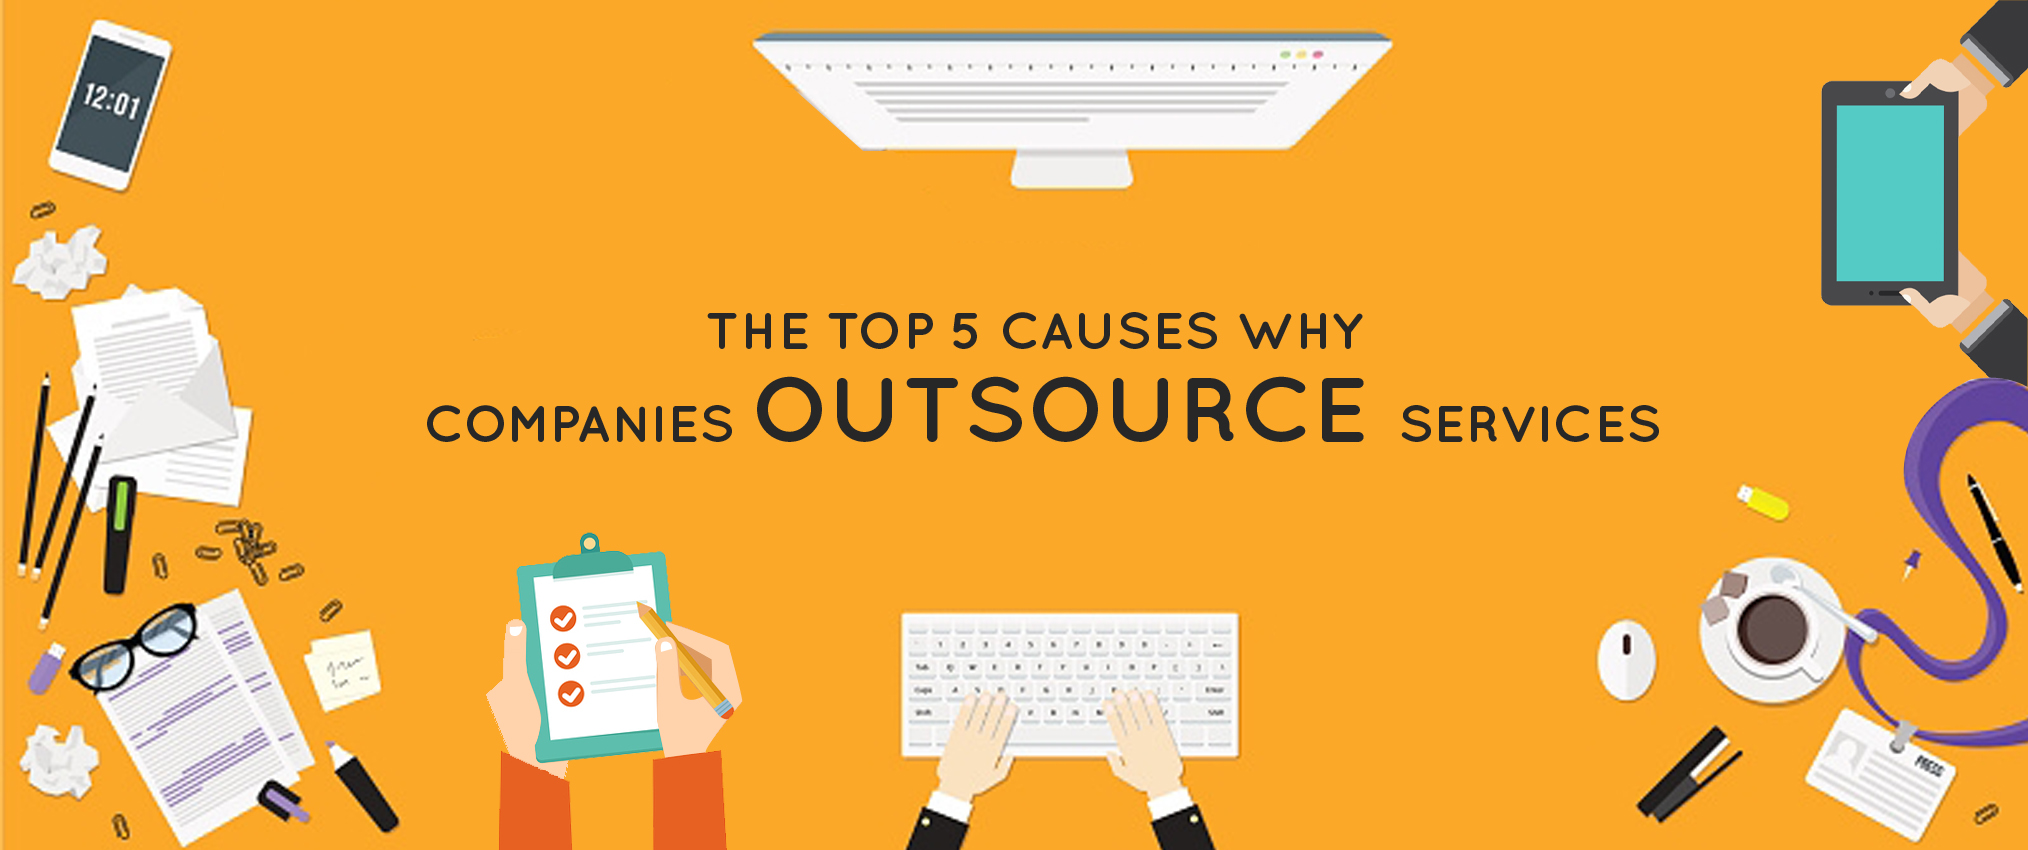 The Top 5 causes Why Companies Outsource Services